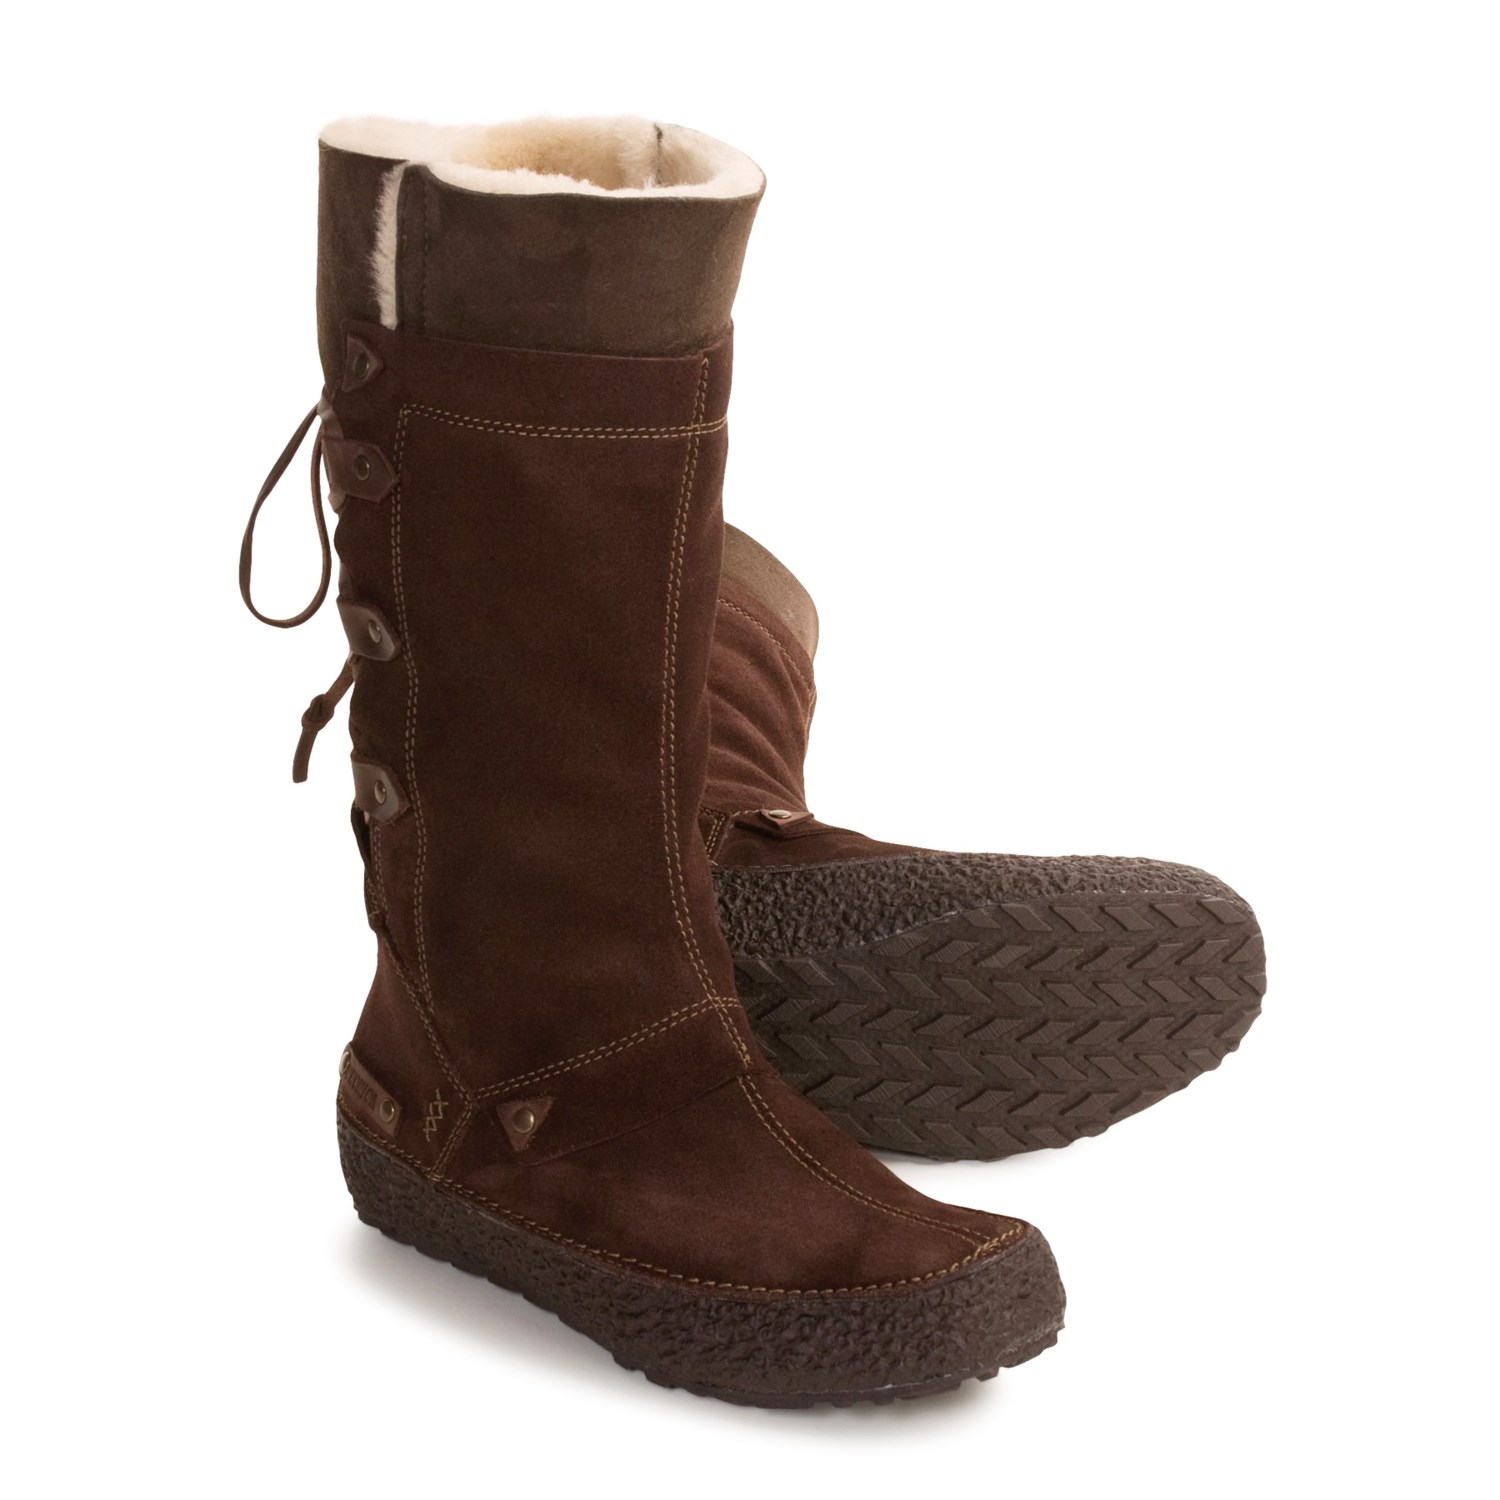 Tecnica Creek Winter Boots (For Women) 2616H - Save 37%